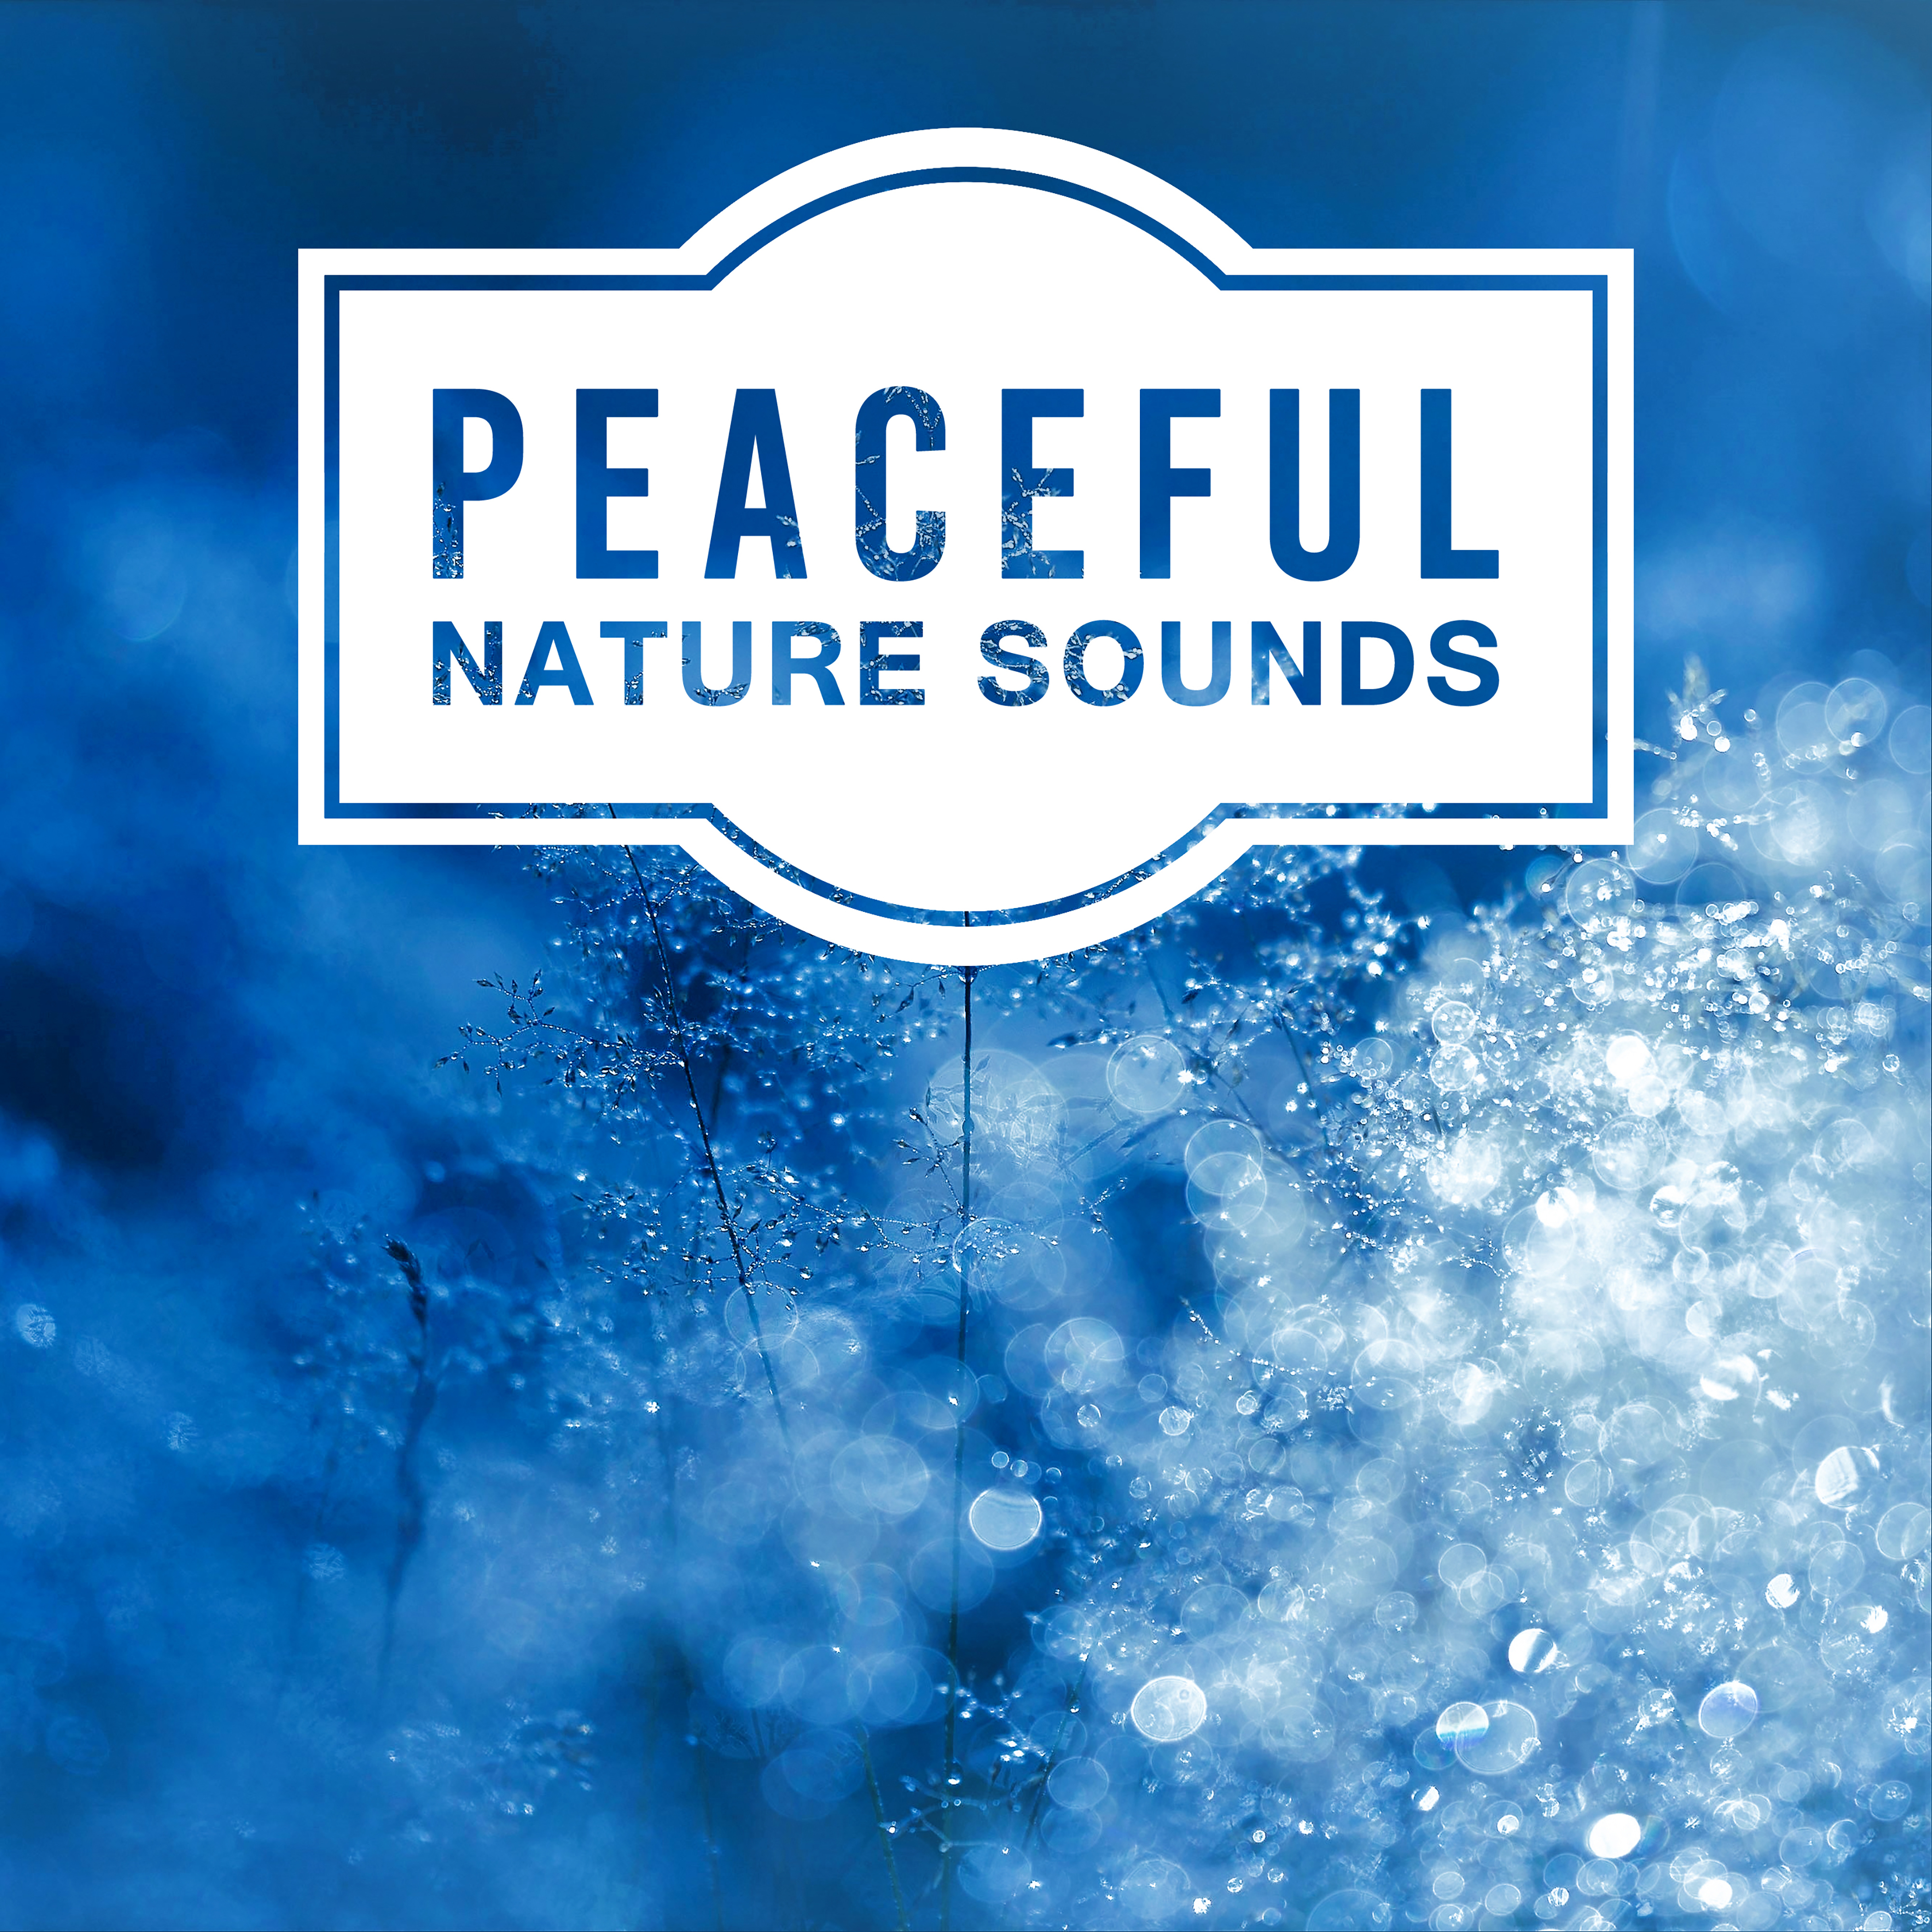 Peaceful Nature Sounds – New Age Music for Relaxation, Pure Waves, Healing Water, Sounds of Sea, Soft Music to Rest, Calm Down